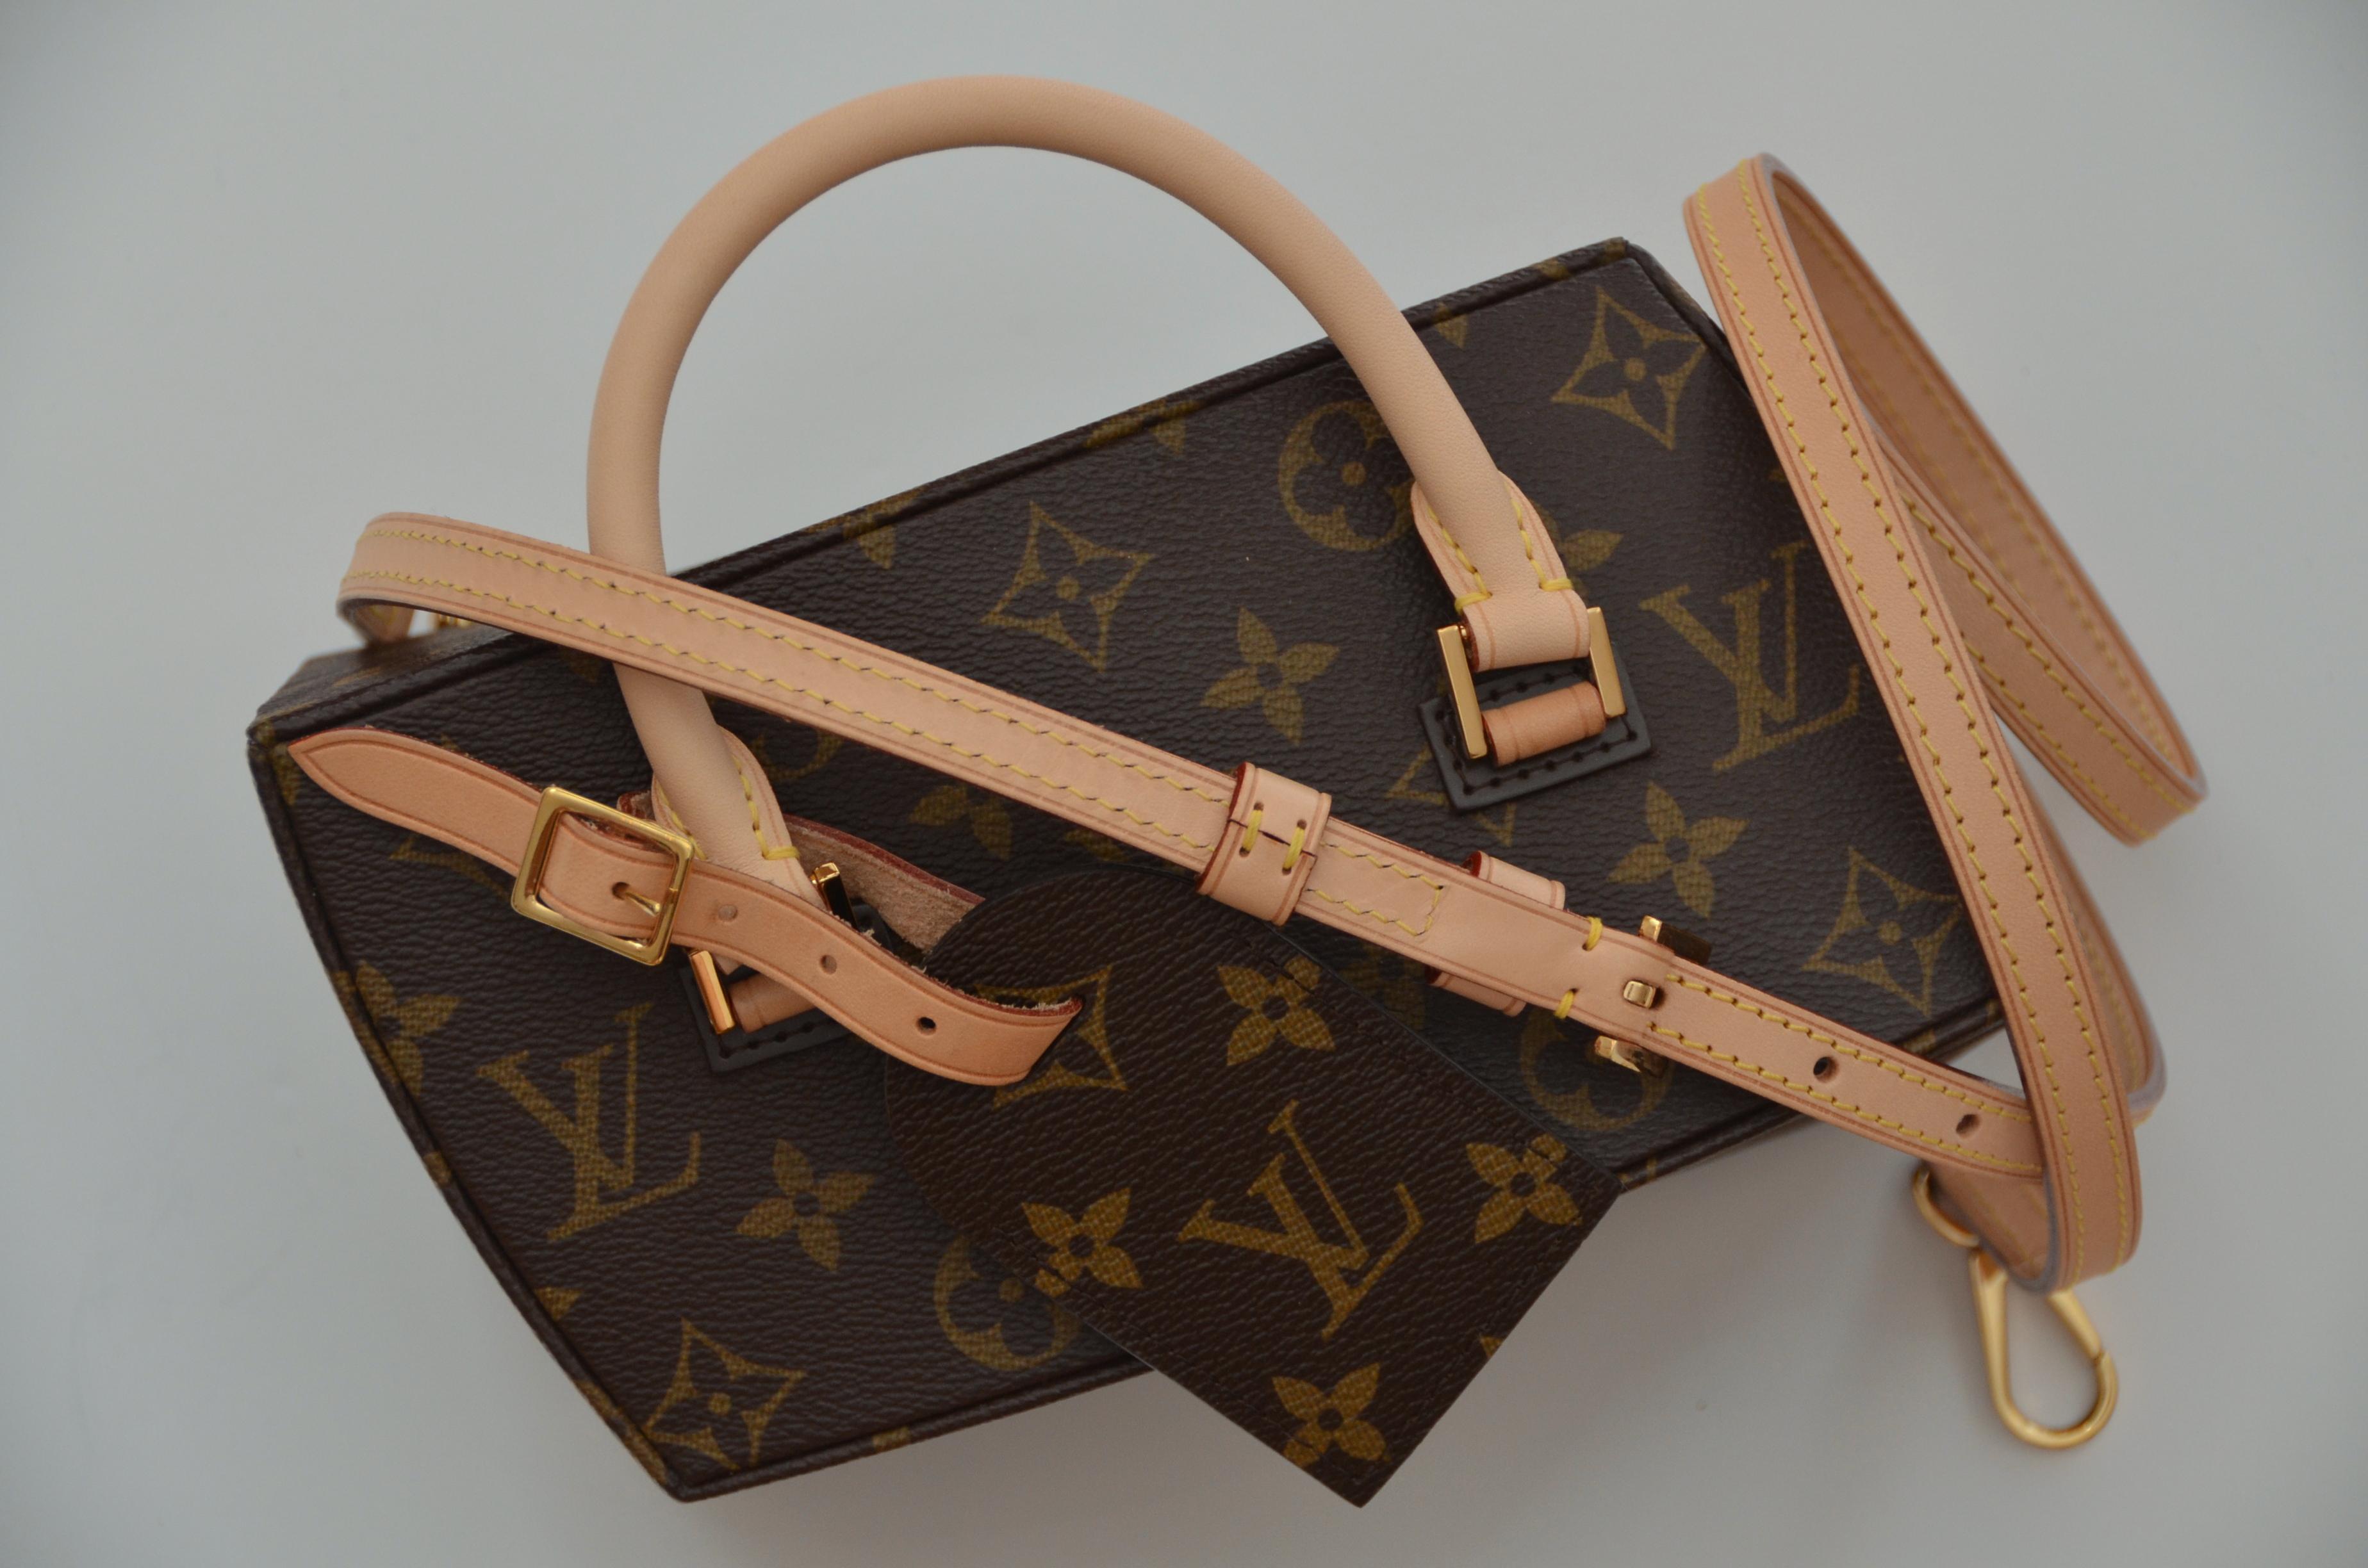 Rare Louis Vuitton. A Frank Gehry Iconoclast Twisted Box  Limited Edition  MINT  2